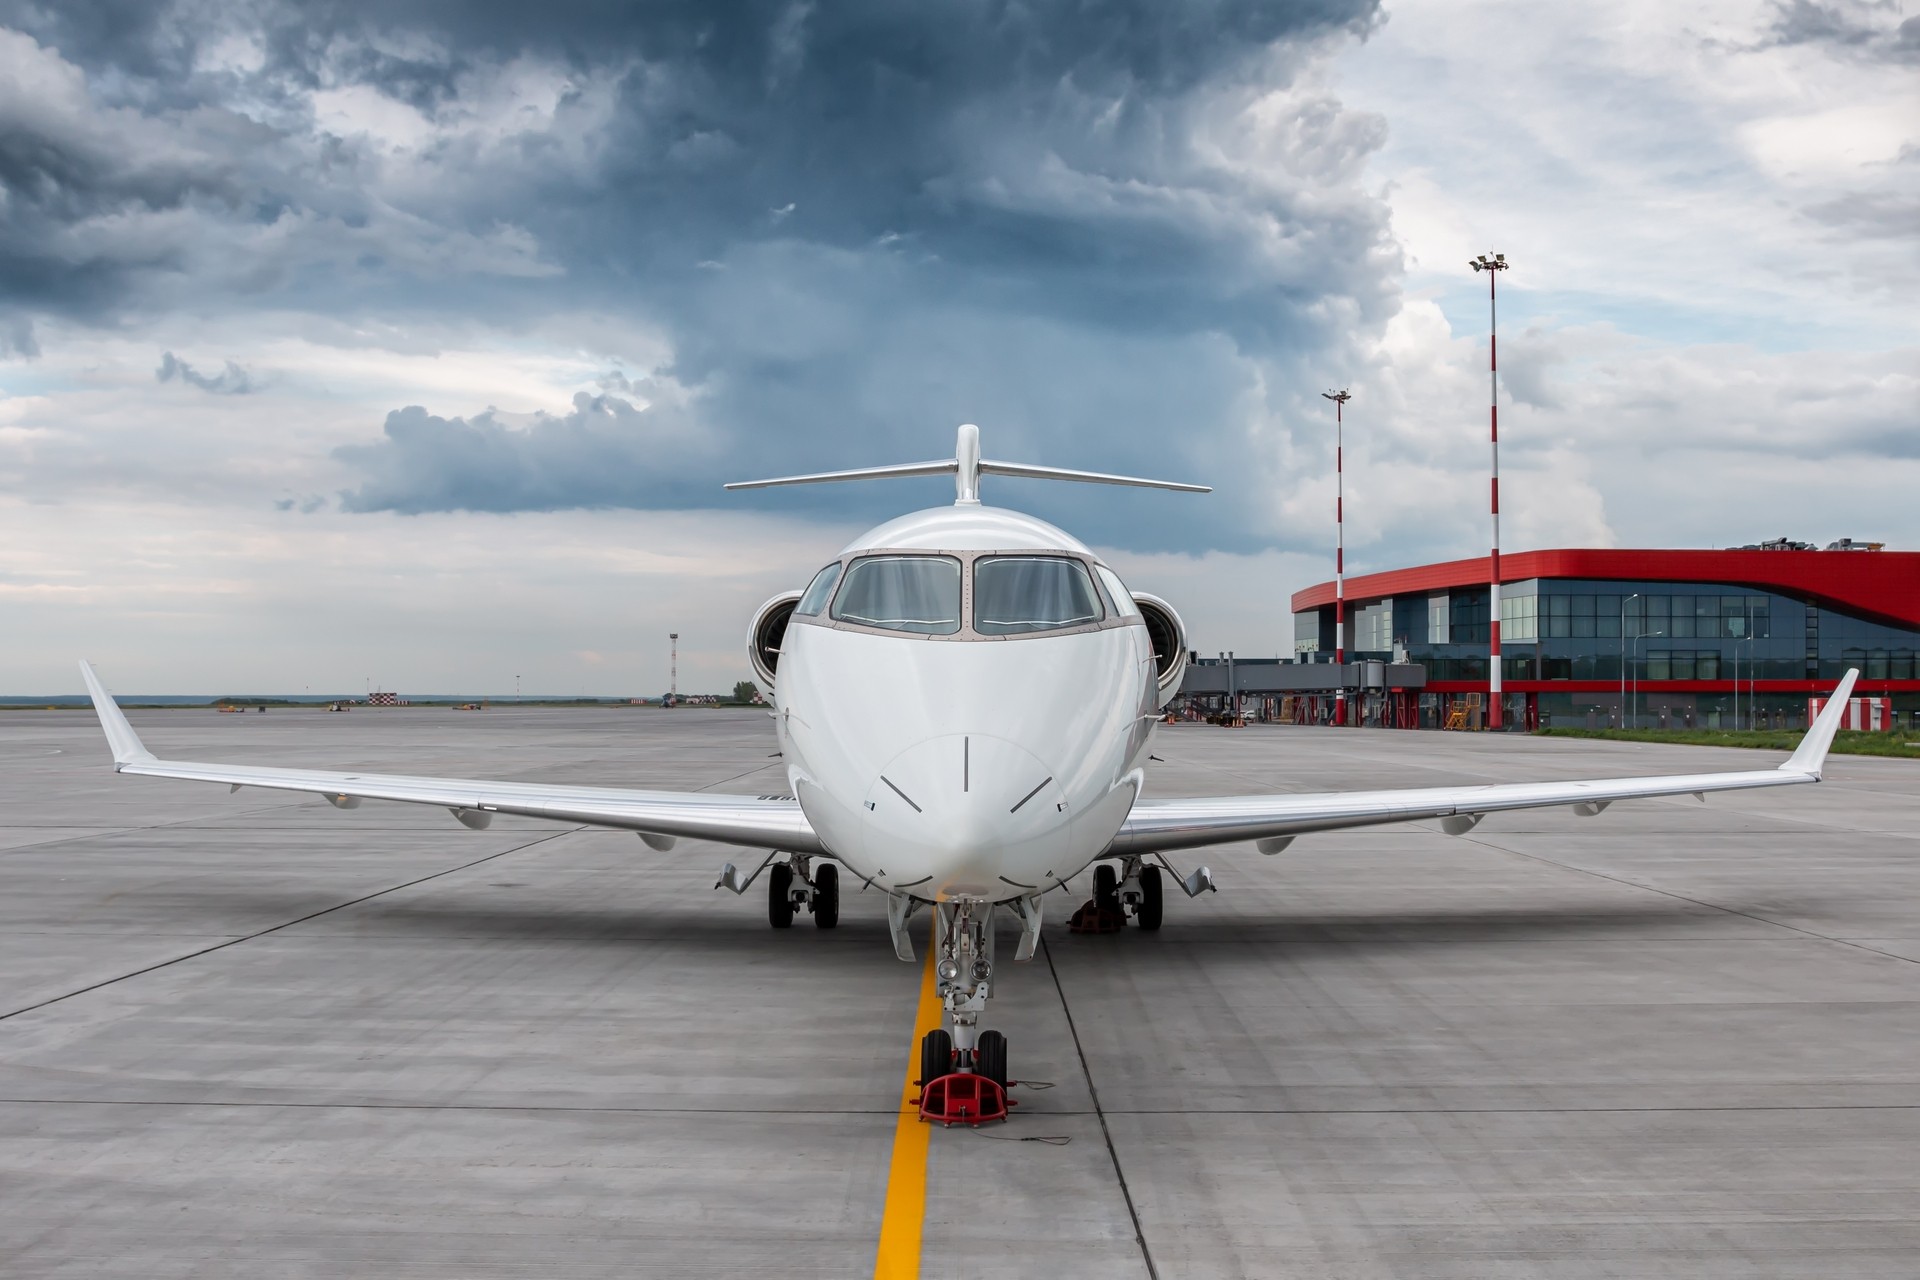 Charter a Private Jet to the PGA Championship